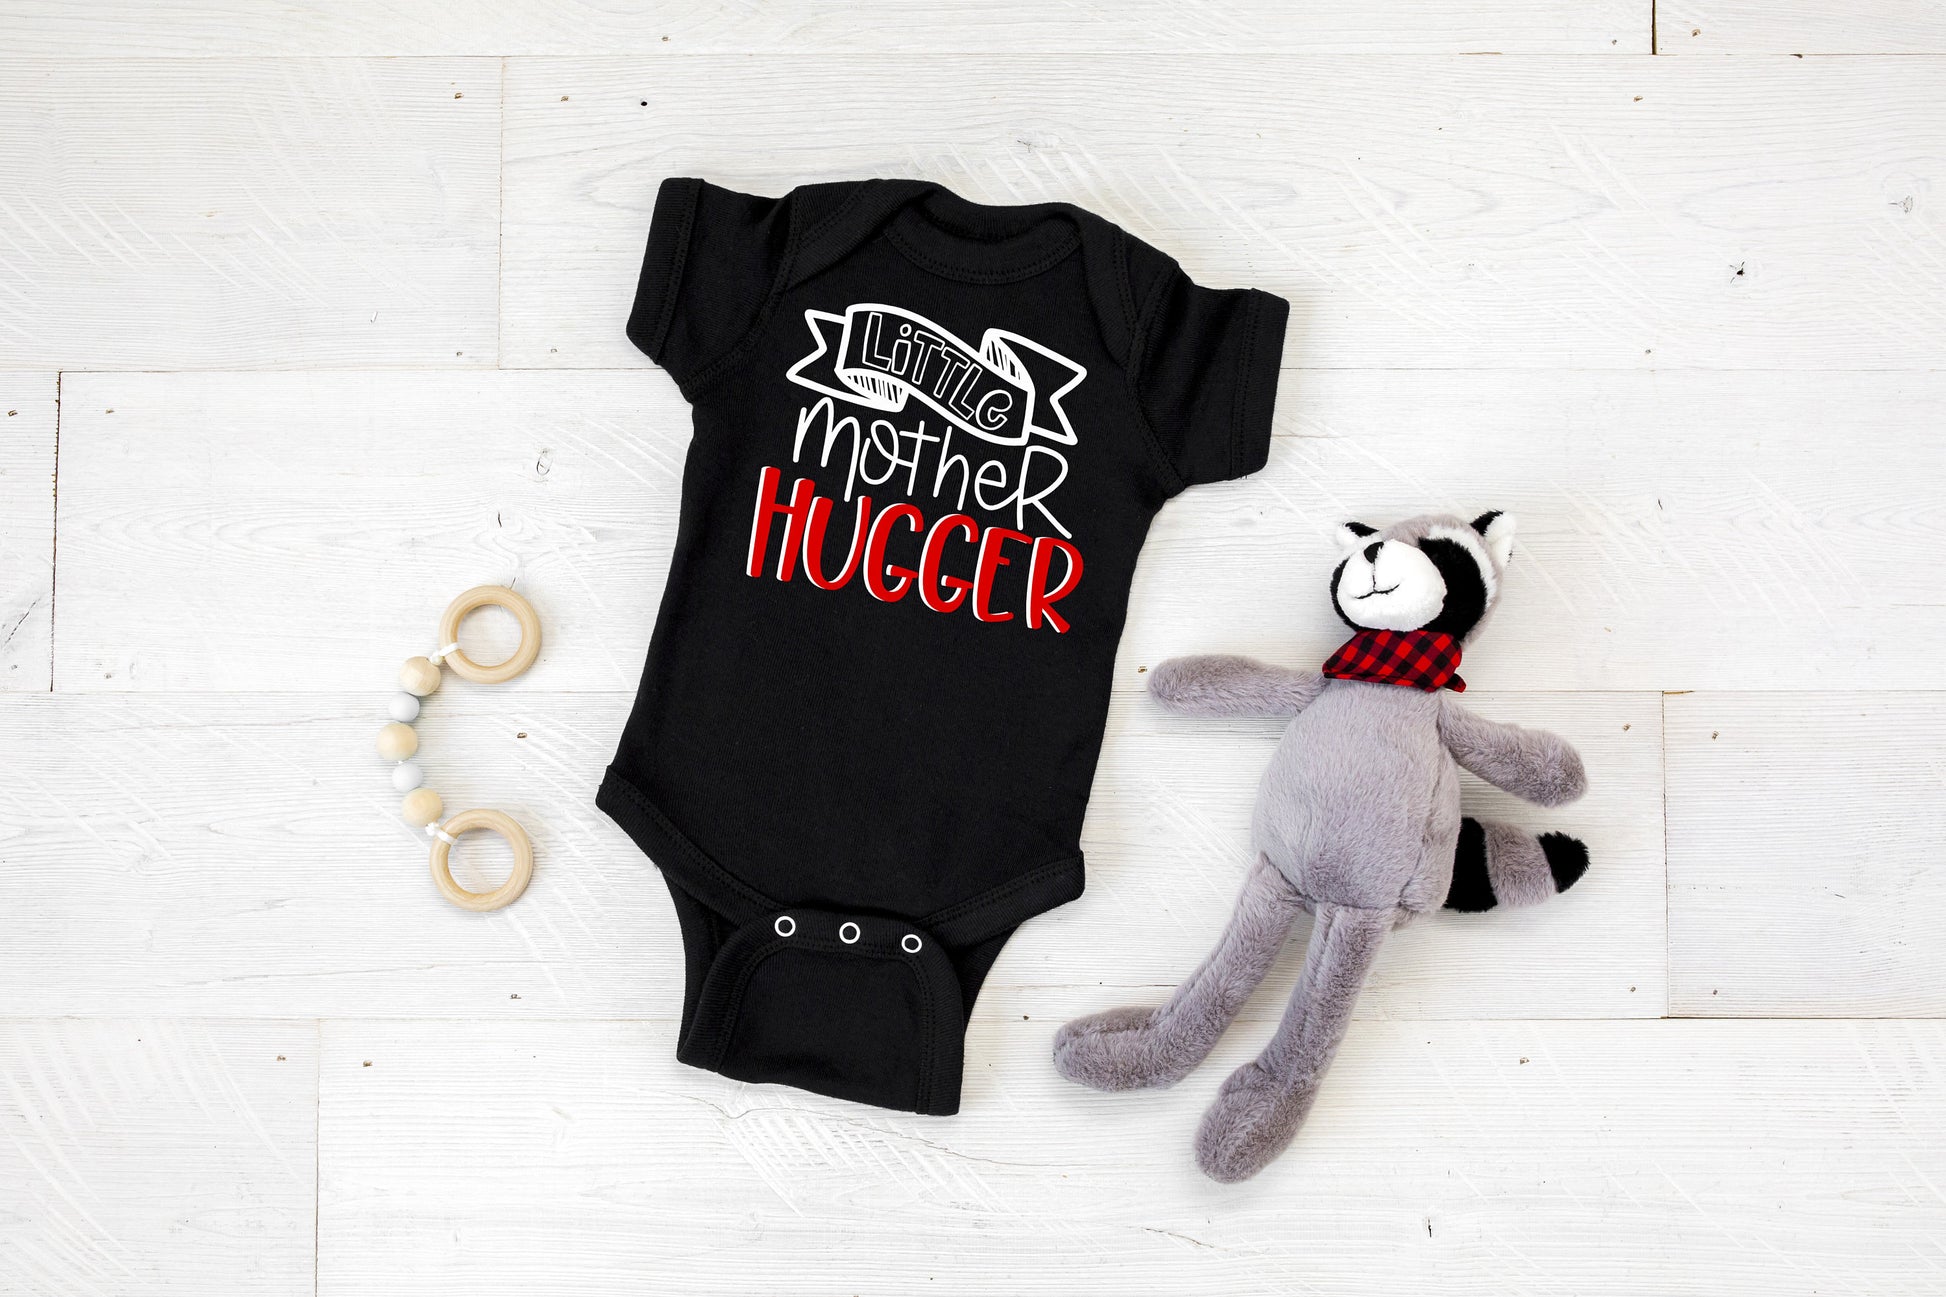 Little Mother Hugger Infant or Youth Shirt or Bodysuit - Funny Baby Bodysuit - Funny Toddler Shirt - Gift for Baby - Baby Boy Clothes